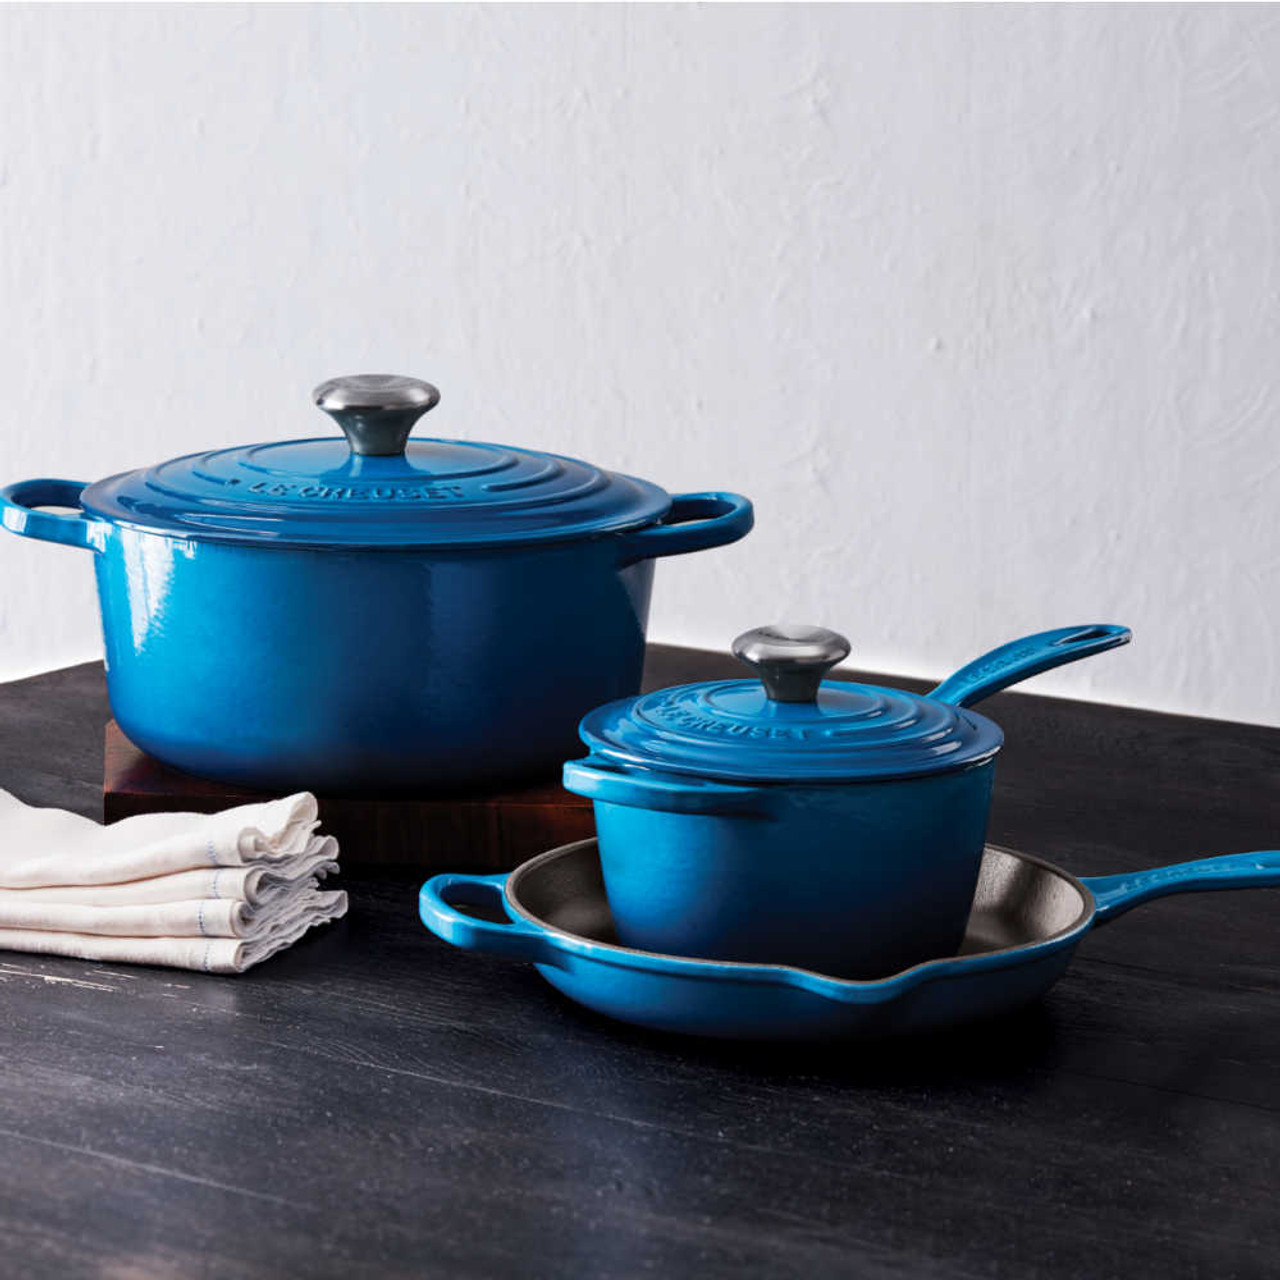 French Cookware Le Creuset - The Reluctant Parisian